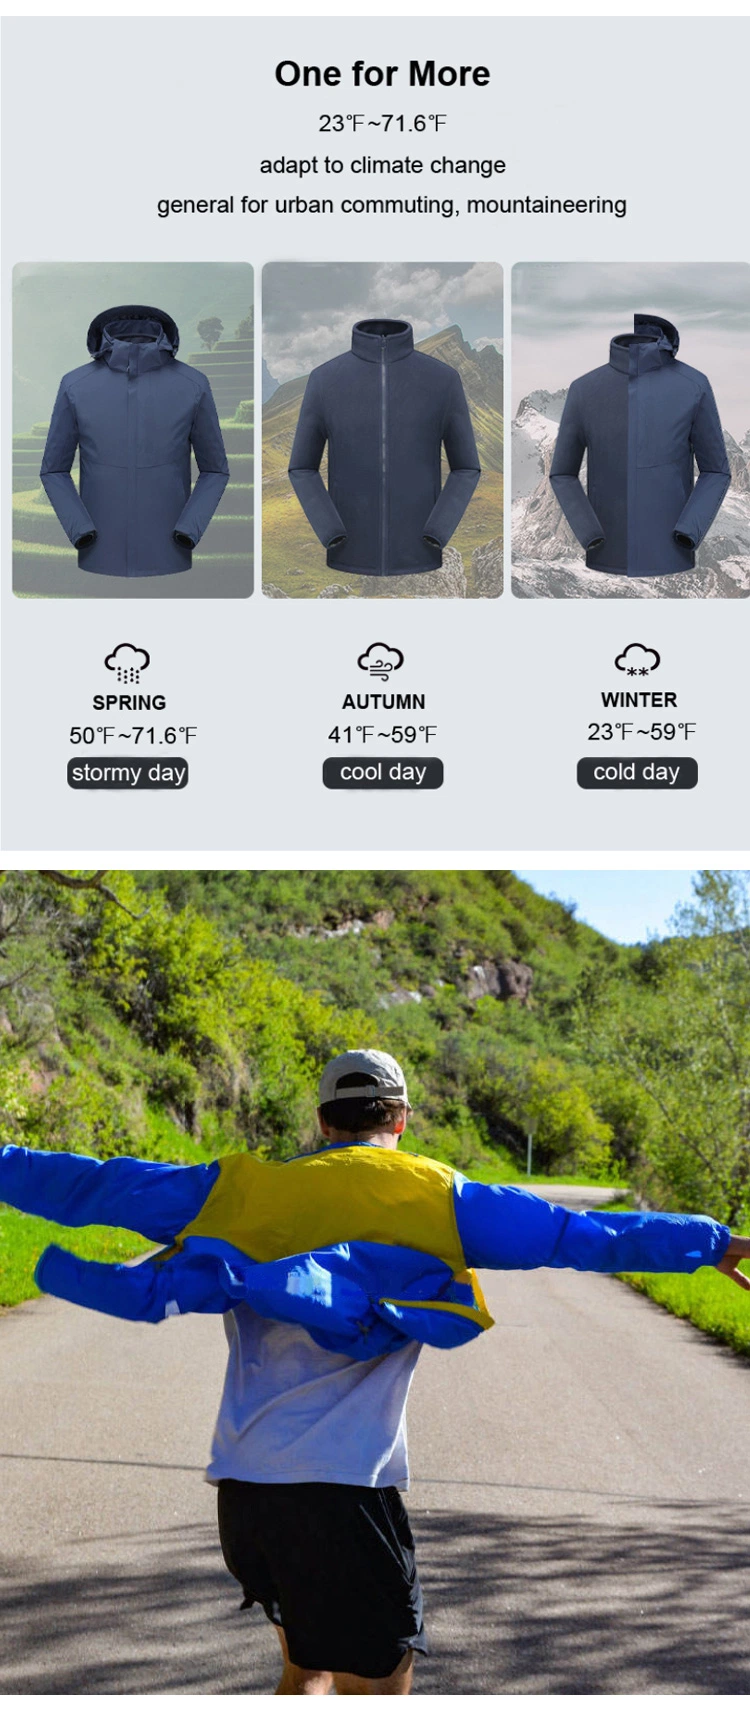 New Outdoor Jacket, Waterproof, Couple Hiking and Climbing,